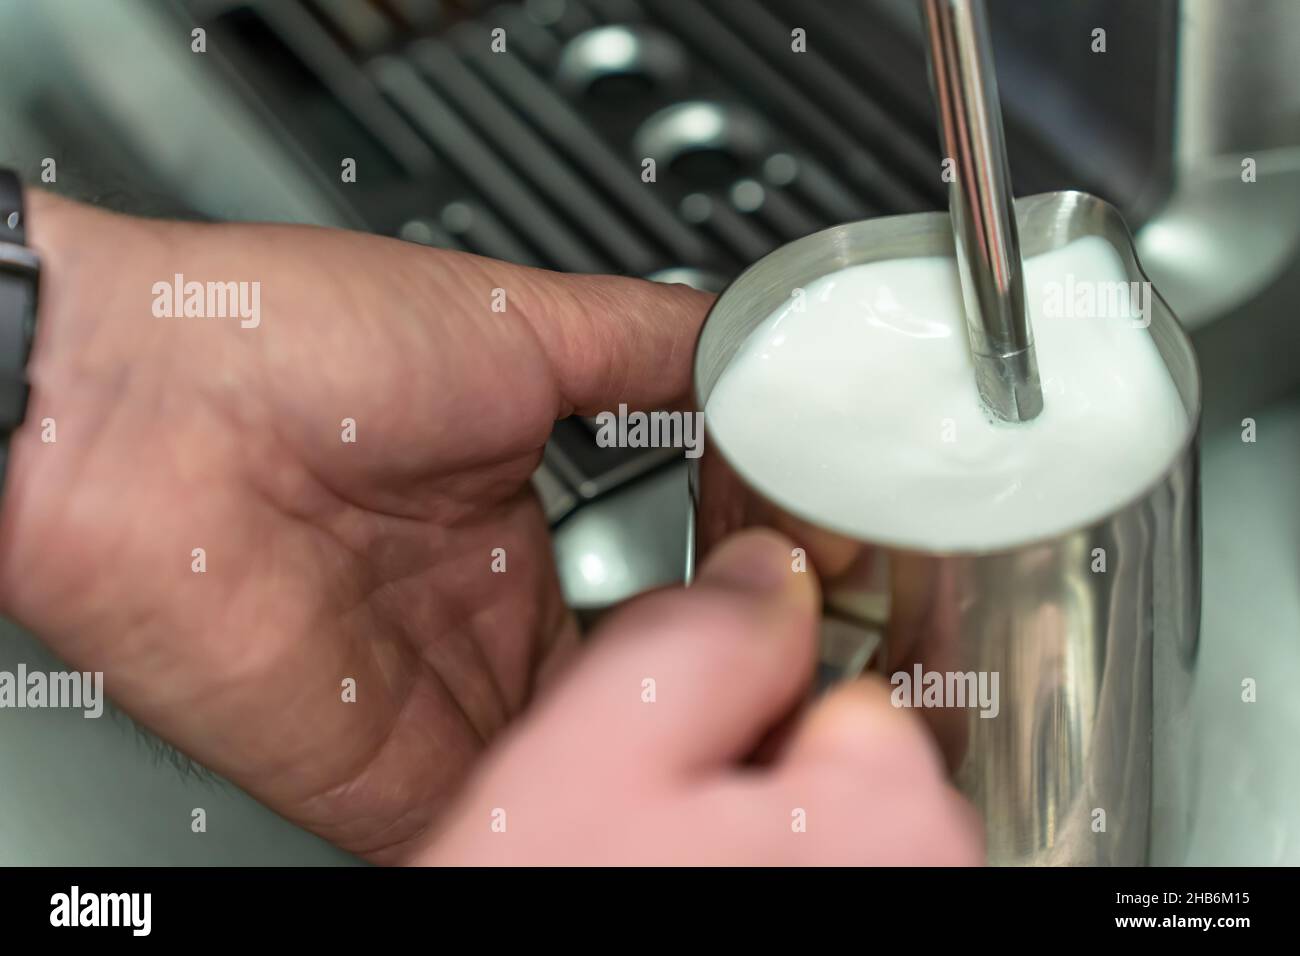 A man whisks milk for a latte in a steel jug. Stock Photo